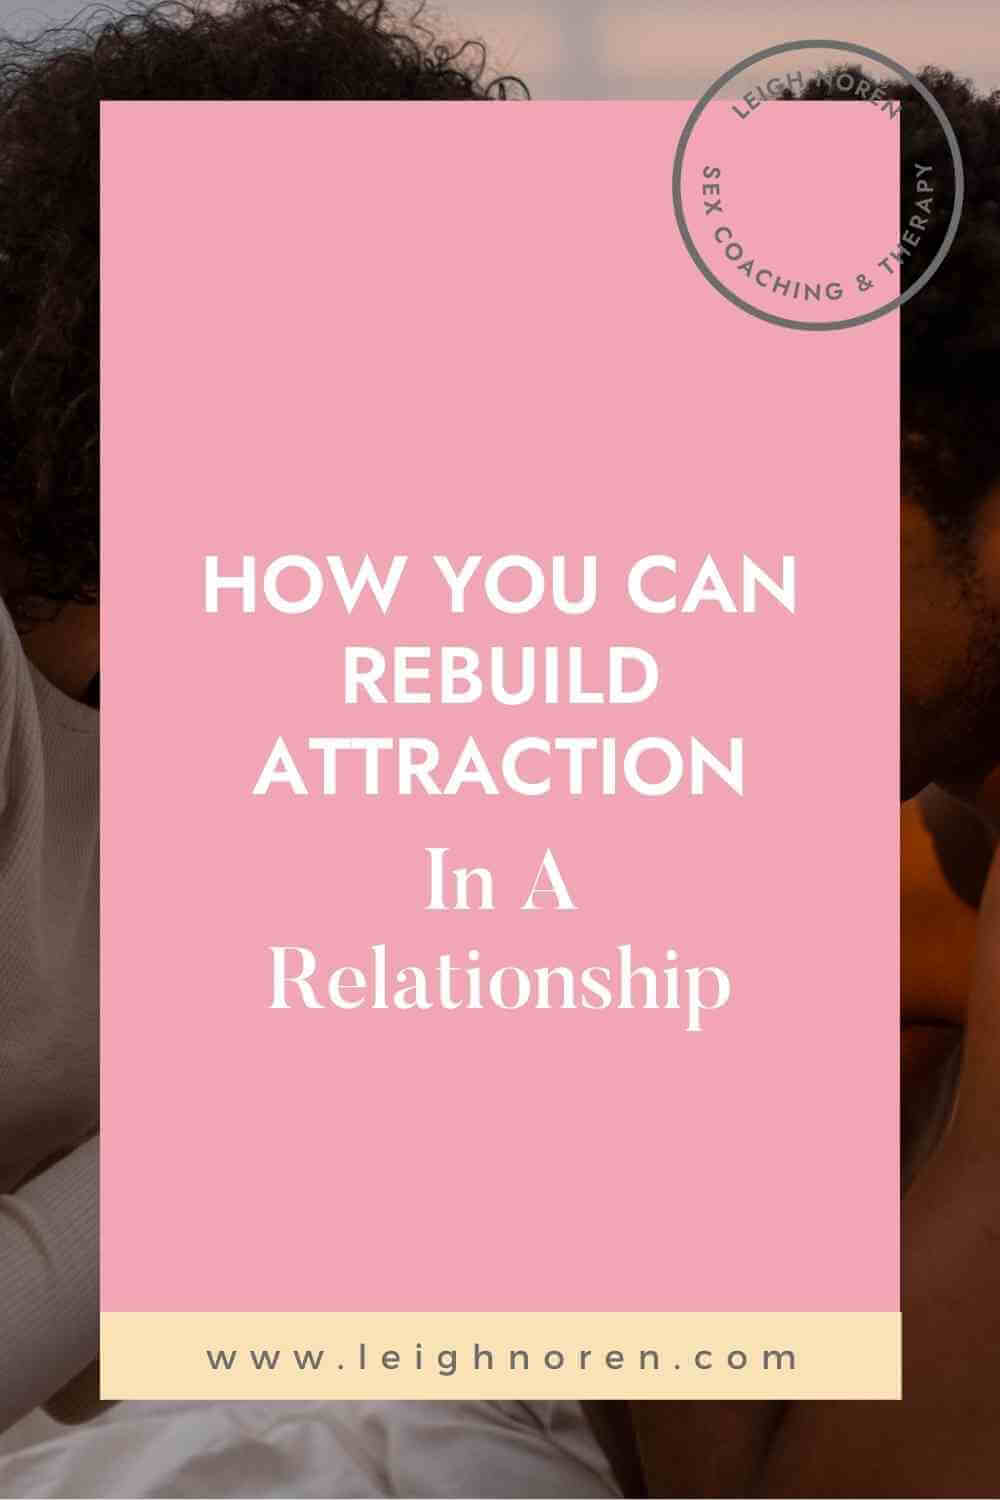 How You Can Rebuild Attraction In A Relationship